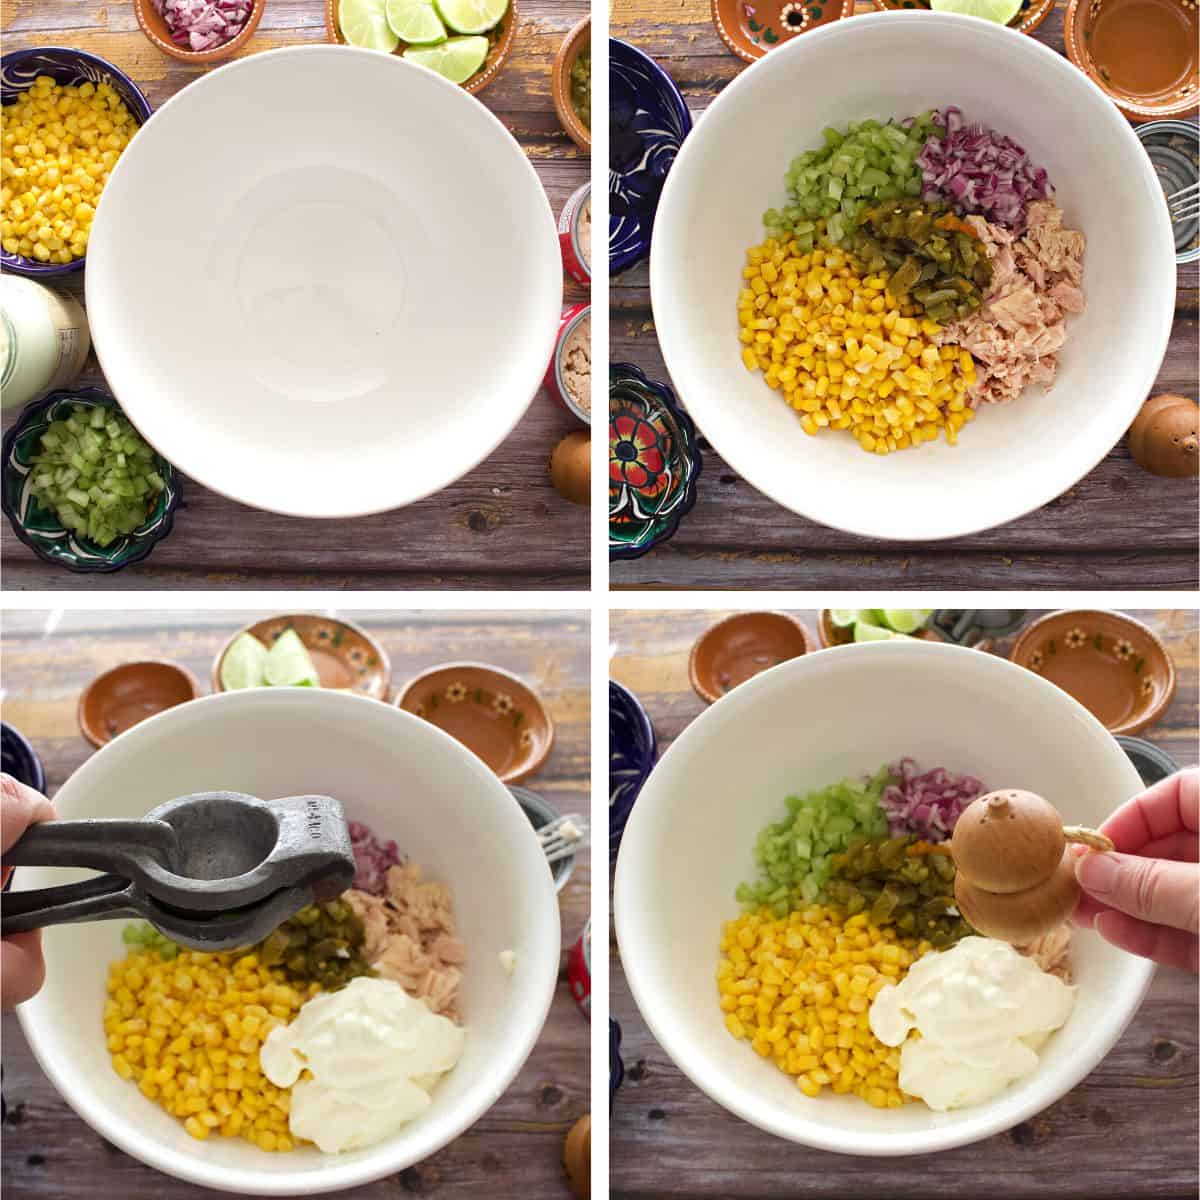 The ingredients needed to make the corn salad mixing inside a white bowl.